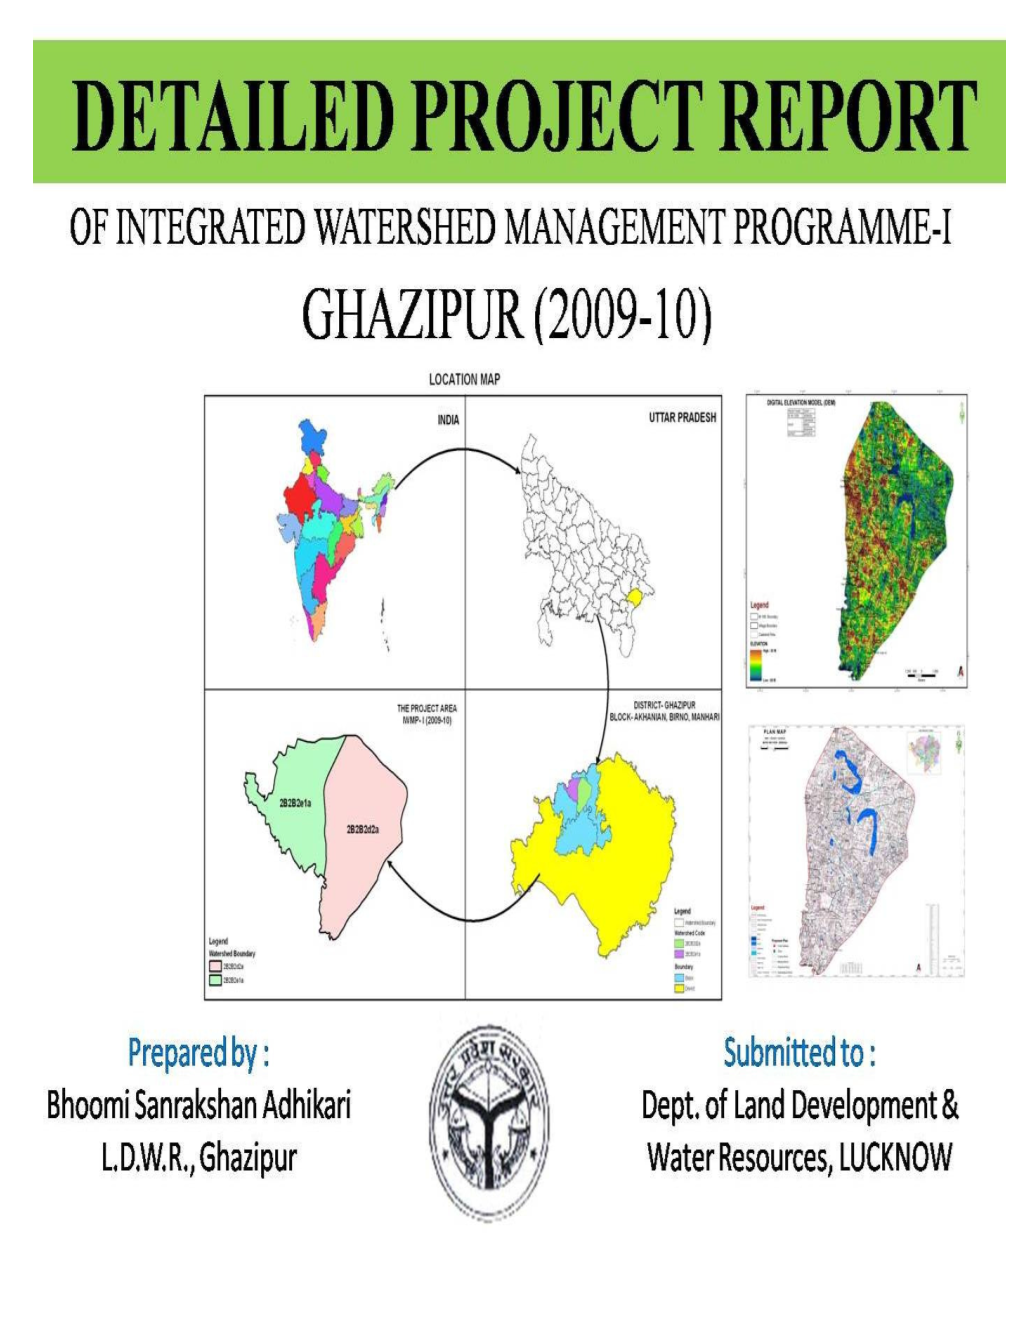 IWMP-I Project Comprising Two Micro-Watersheds of District